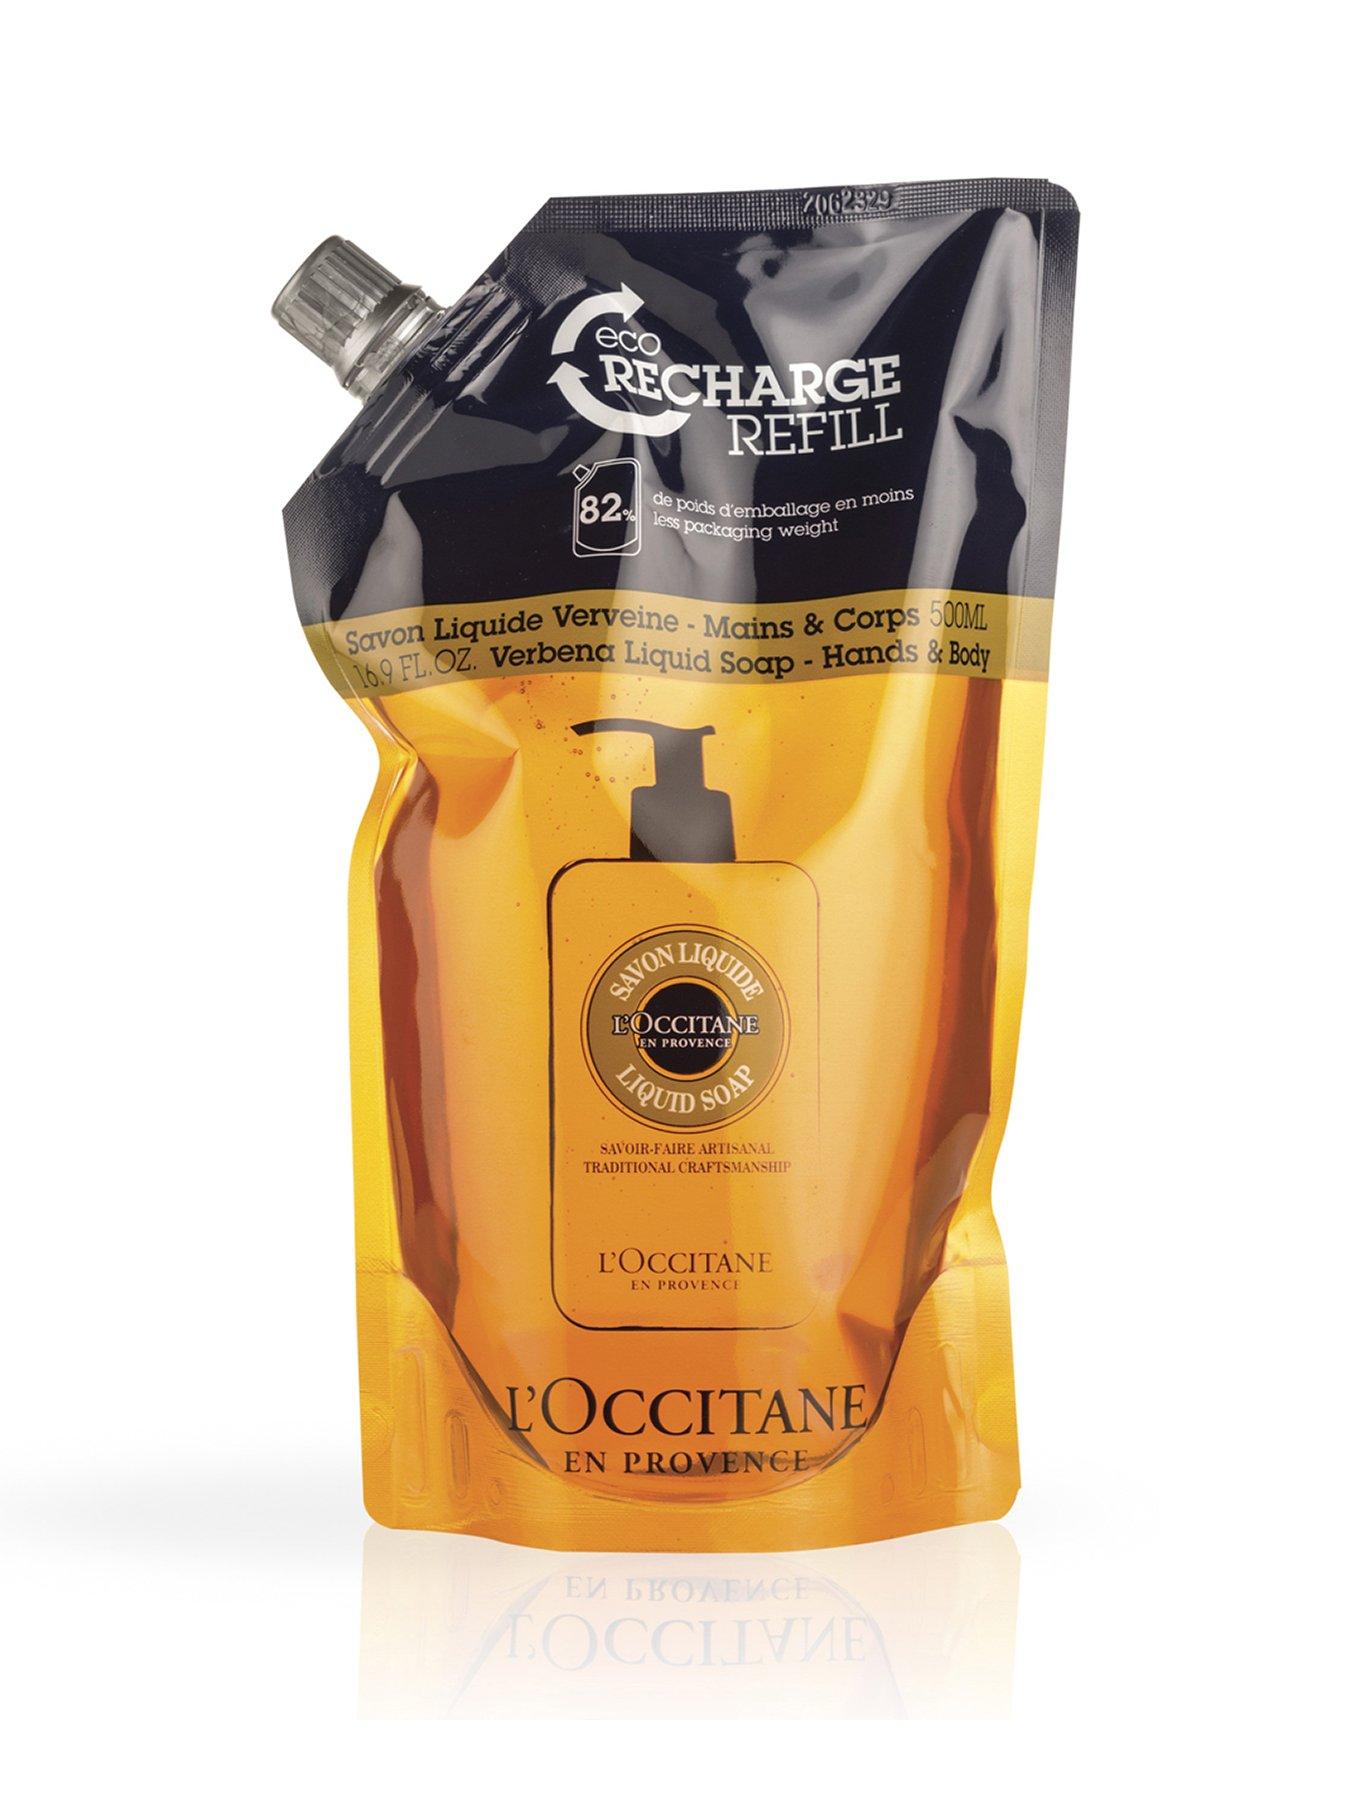 L'Occitane Moisturizing 15% Shea Butter Body Rich Lotion: Nourish and  Comfort, Protect From Dryness, Sensitive-Skin and Family Friendly, 8.4 Fl Oz